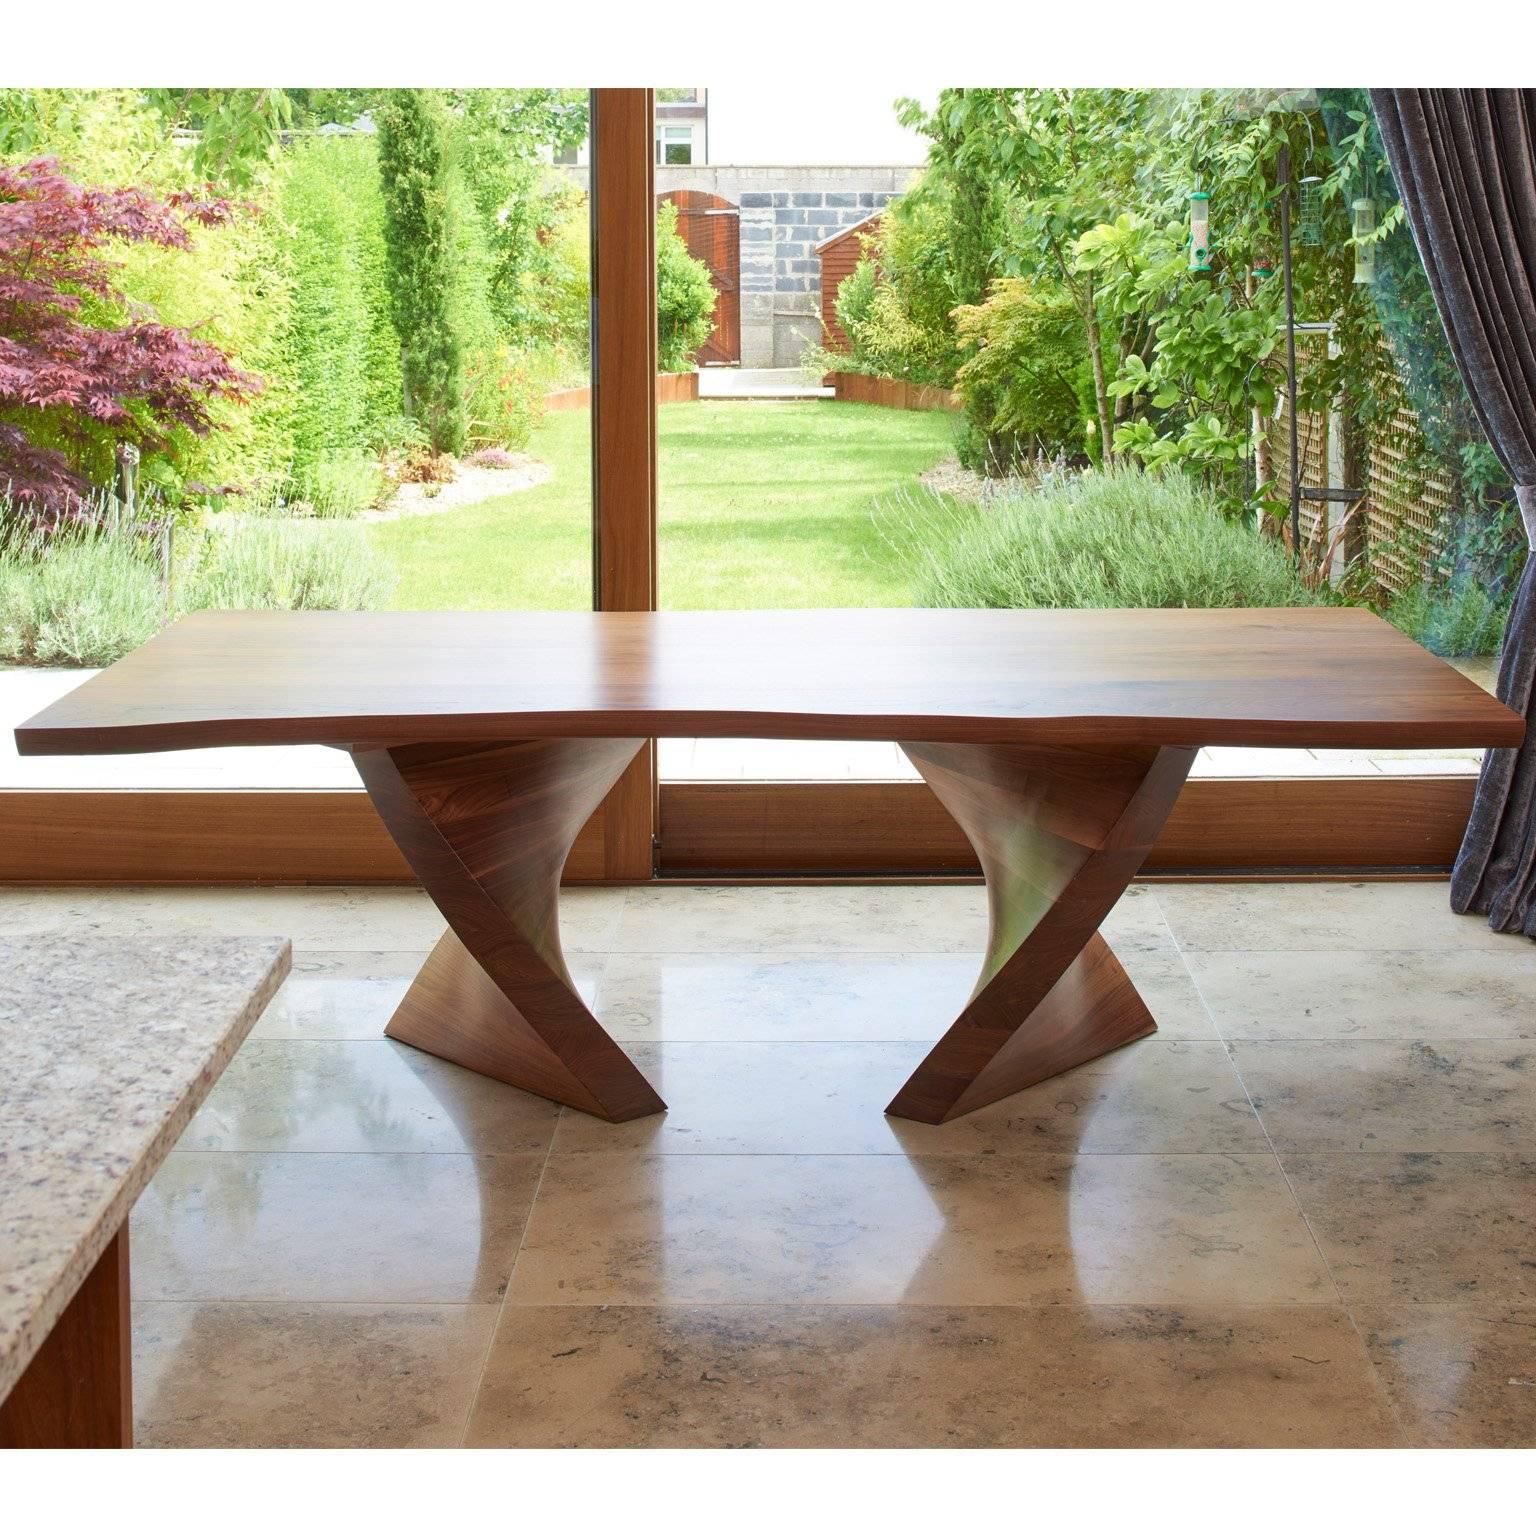 statement dining tables